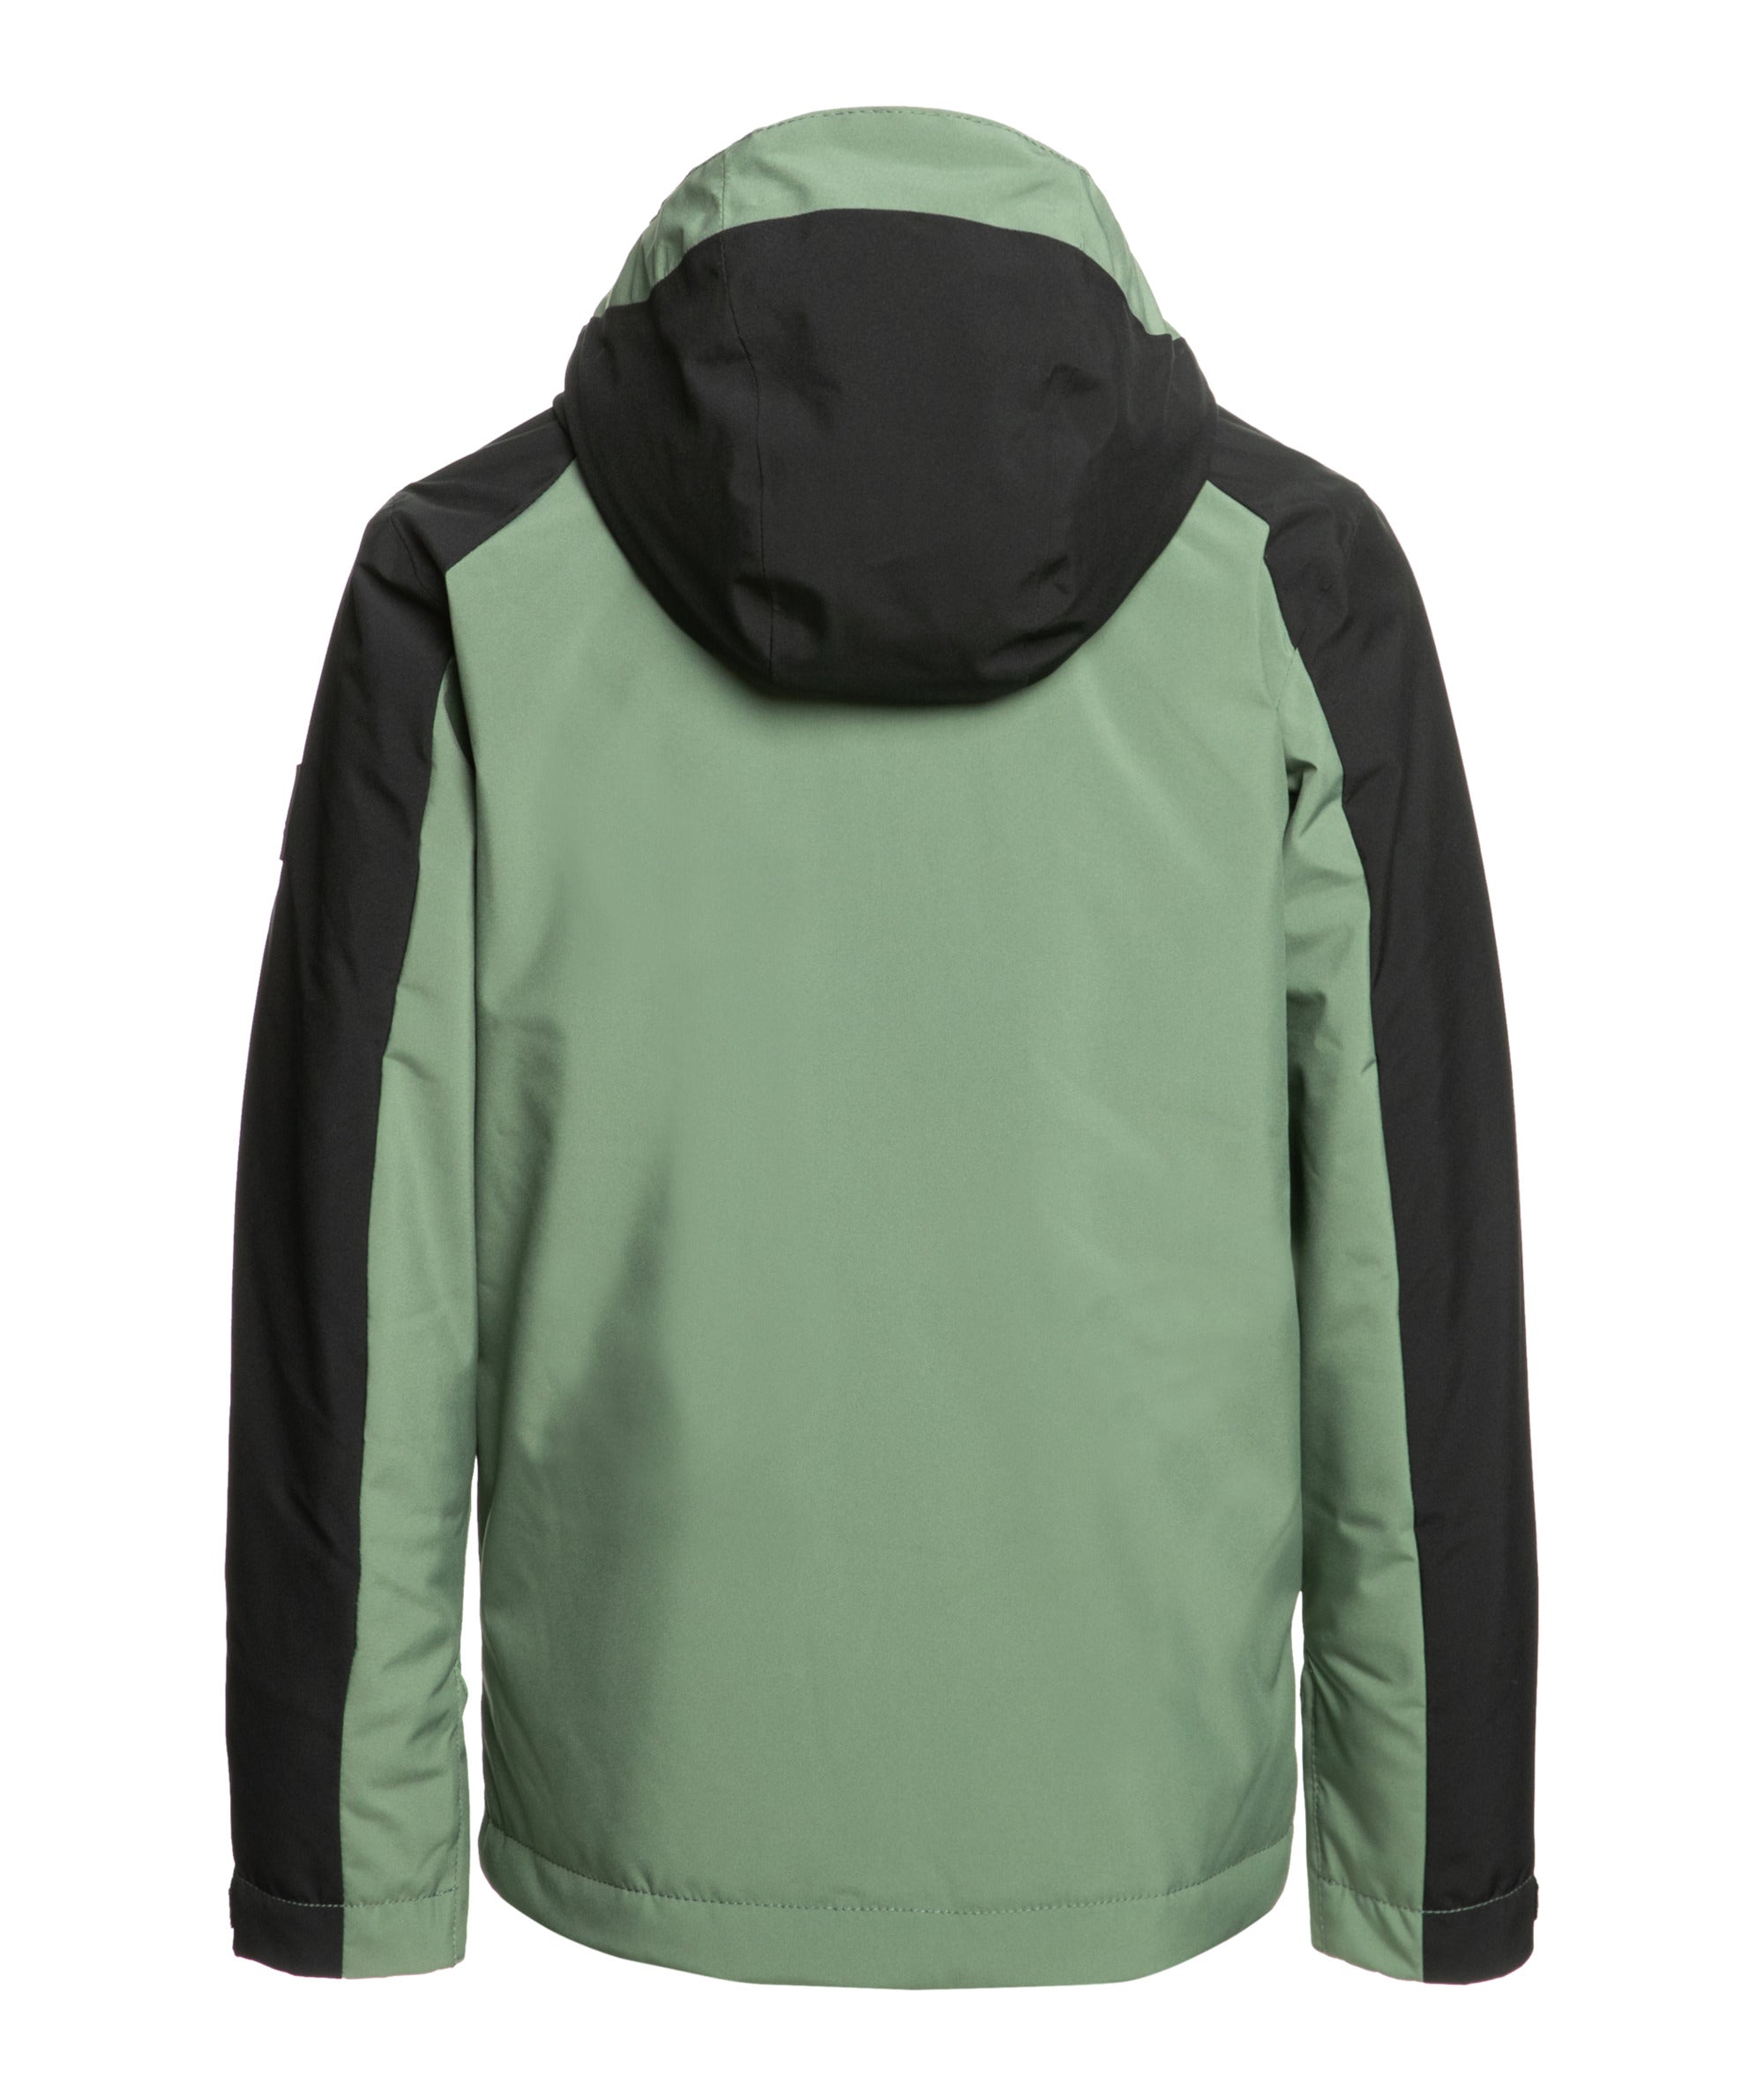 Quiksilver Mission Solid Youth Jacket - 88 Gear